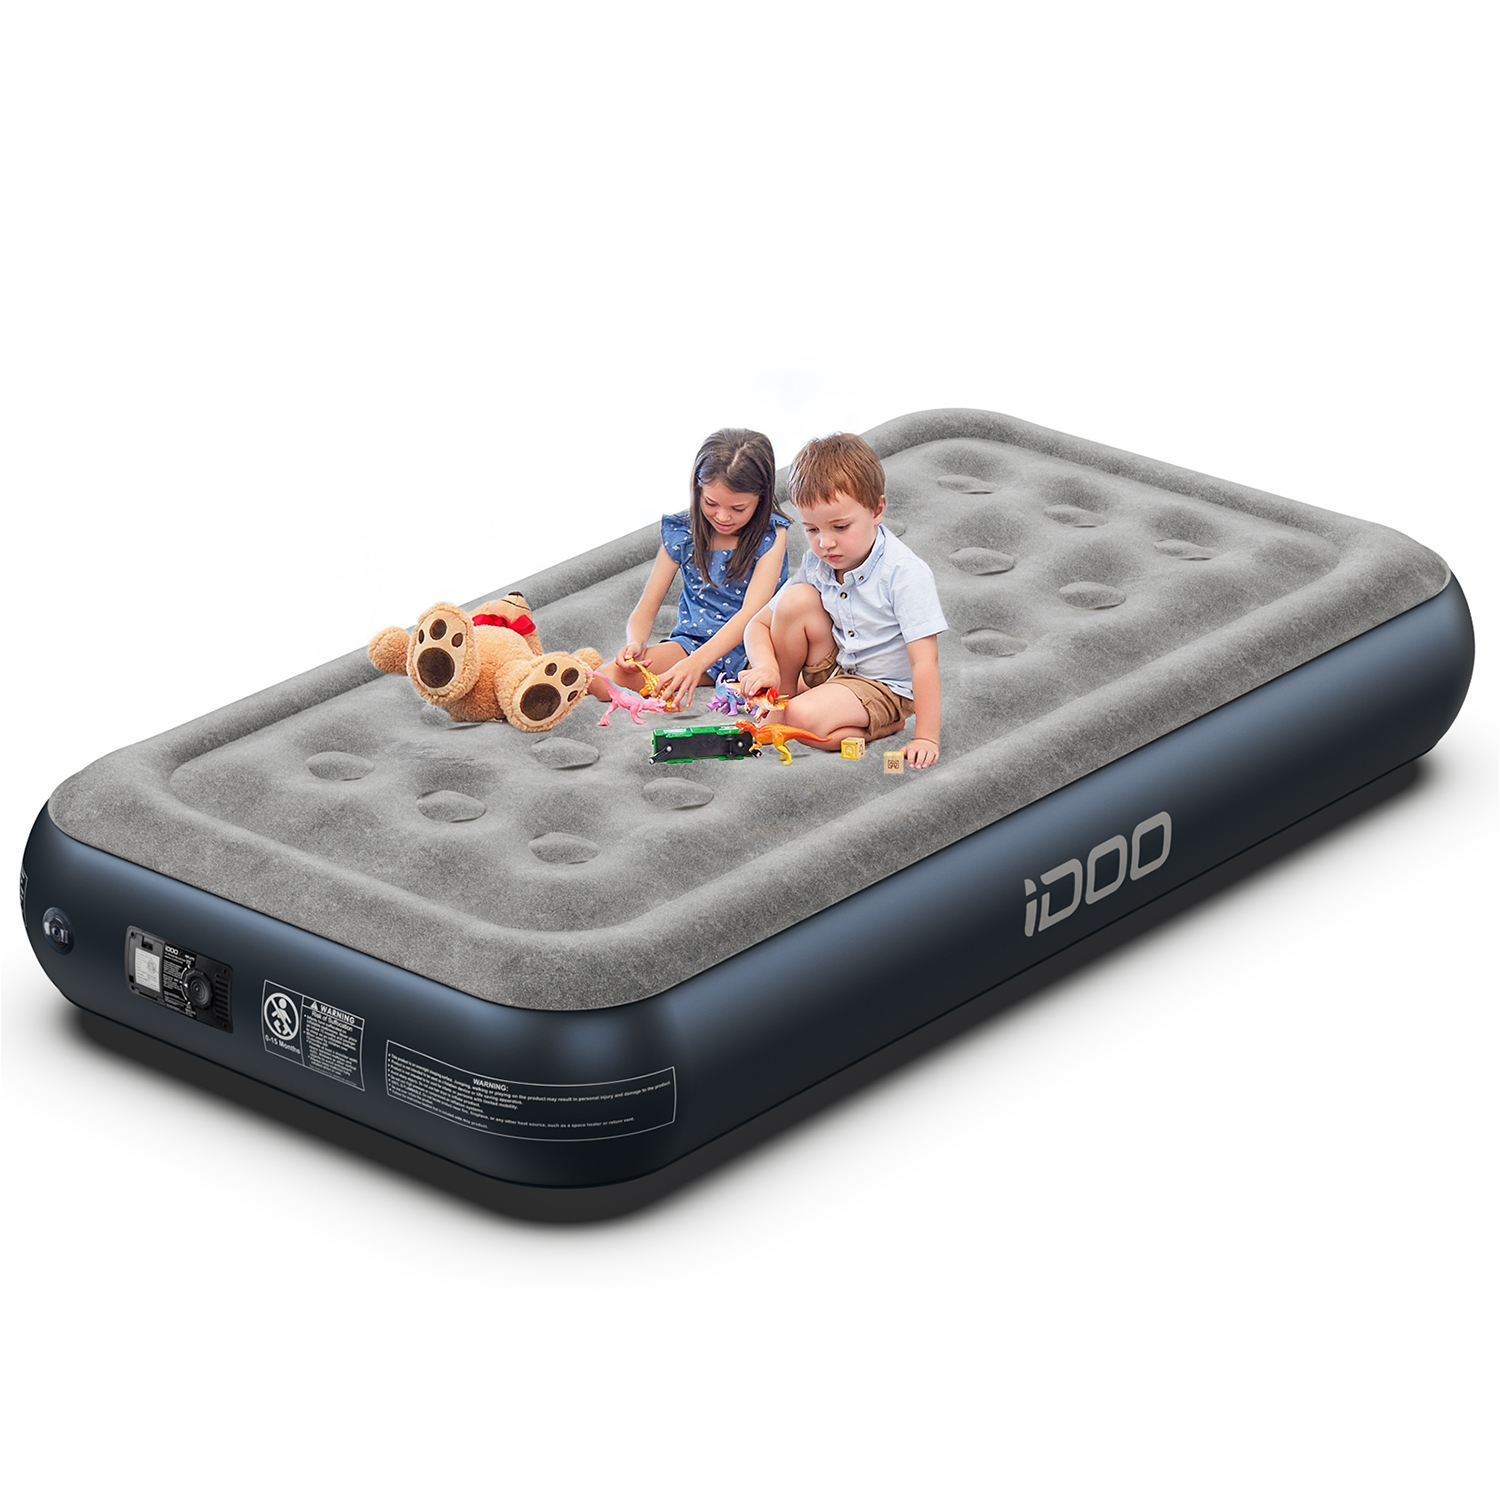 iDOO 13'' Twin Air Mattress, Inflatable Airbed with Built-in Pump, 550lb Max - image 1 of 10